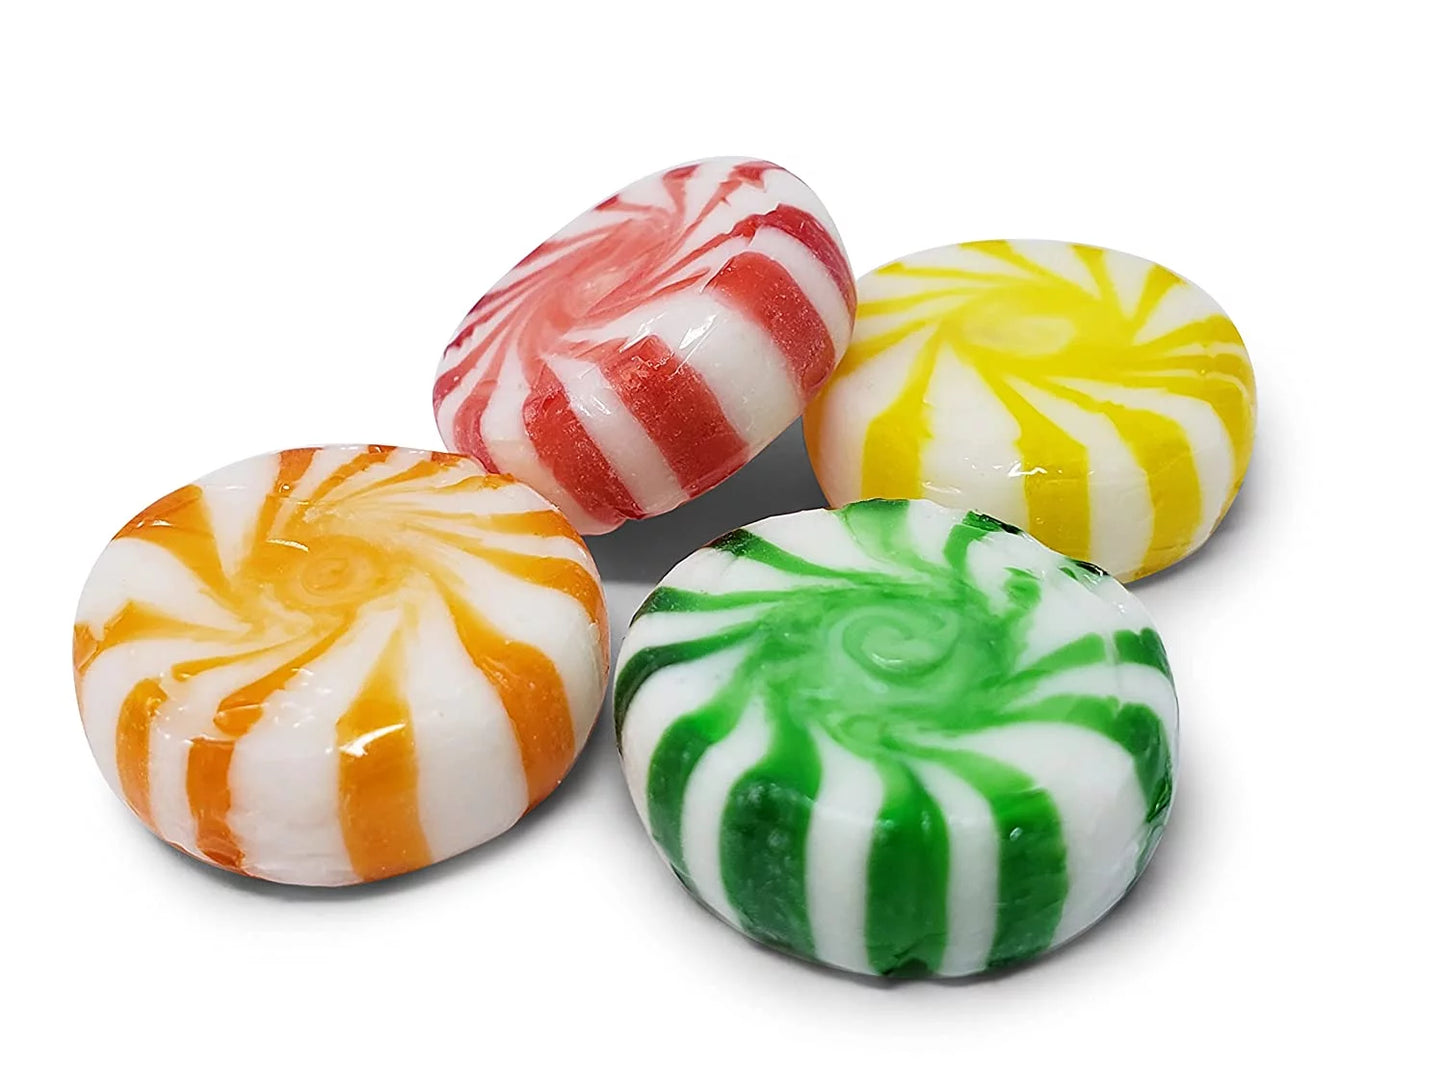 Co. Old Fashioned Hard Candy Flavors, Bulk - Individually Wrapped Nostalgia Candies Variety for Parties, Snacking, Women, Men, Girls and Boys, 64 Oz (Assorted Fruit Buttons)